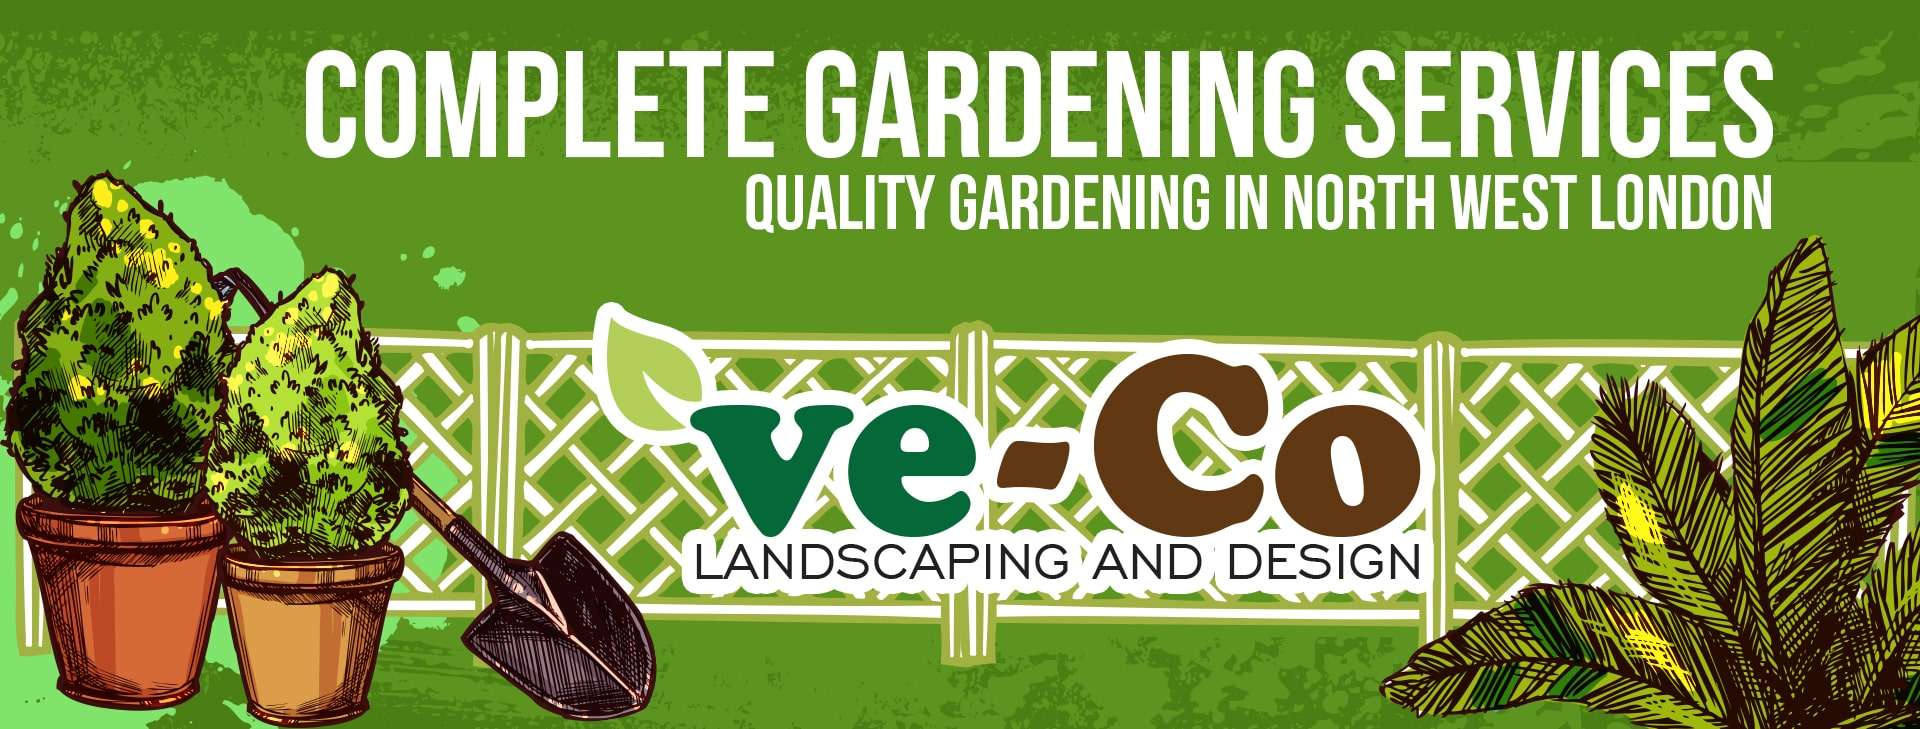 Ve-Co Complete Gardening services